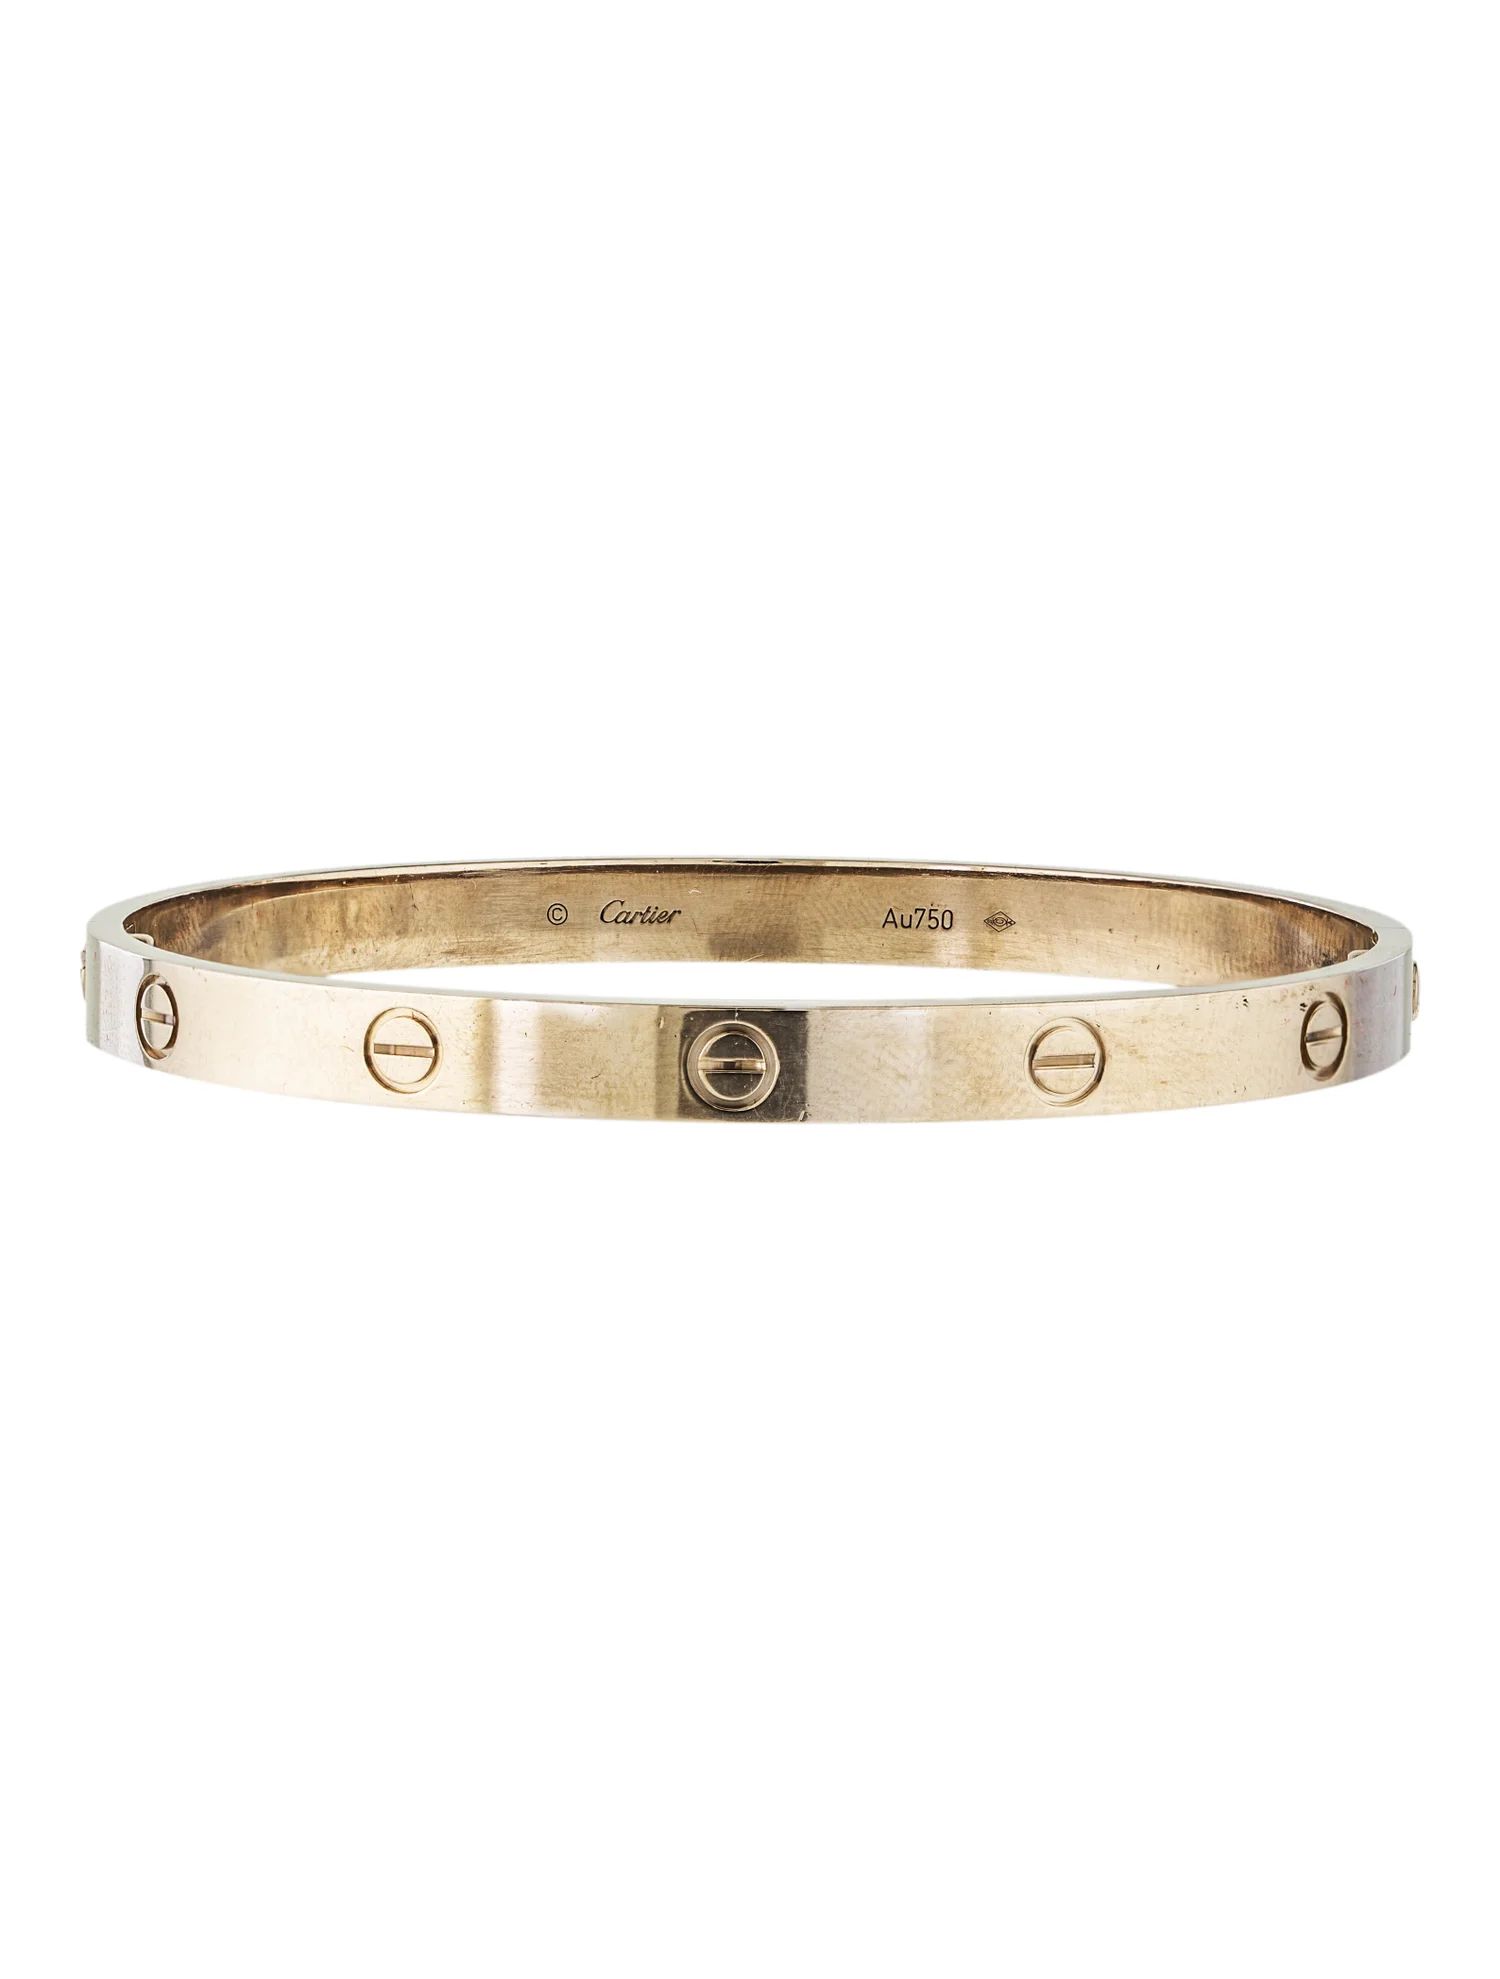 Cartier LOVE Bracelet - Bracelets -
          CRT47673 | The RealReal | The RealReal